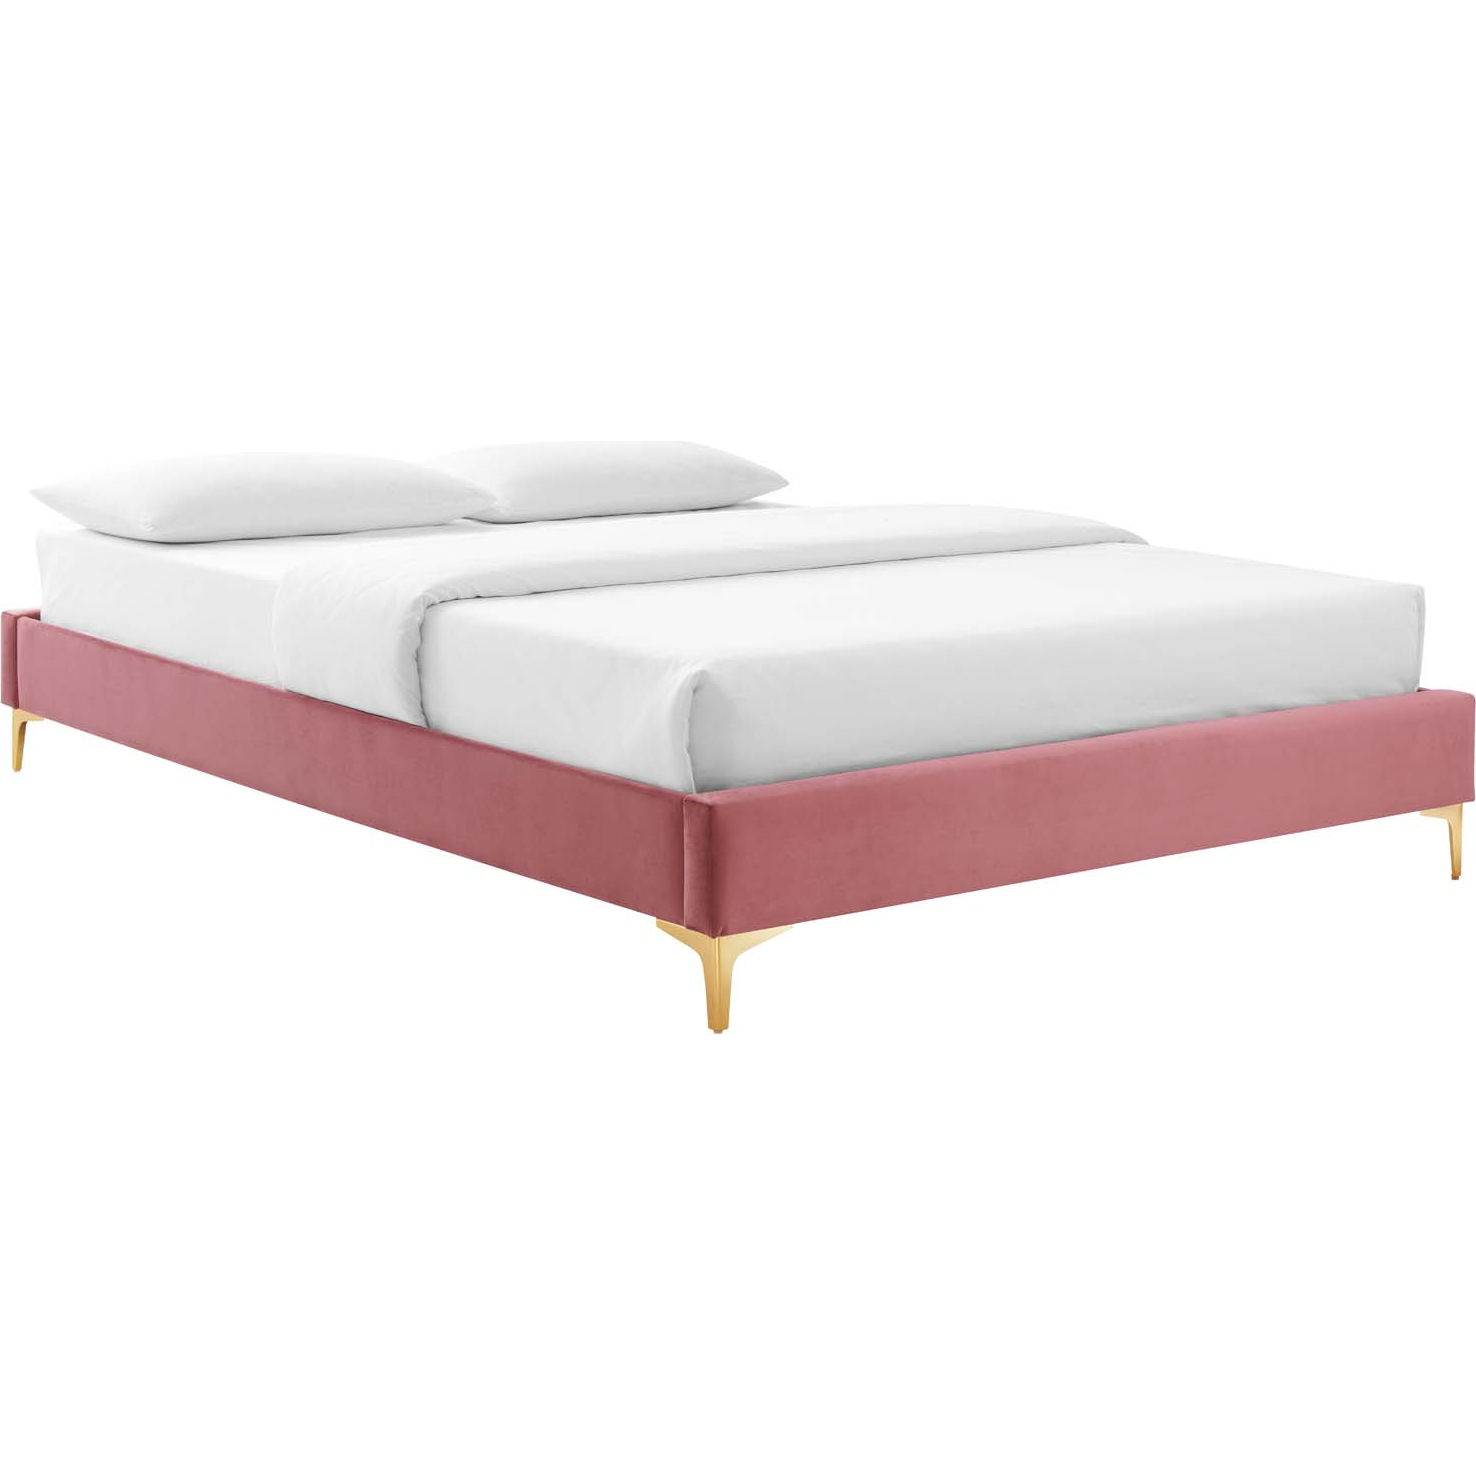 Modway Mod 6305 Dus Sutton Twin Bed, Rose Gold Twin Bed Frame